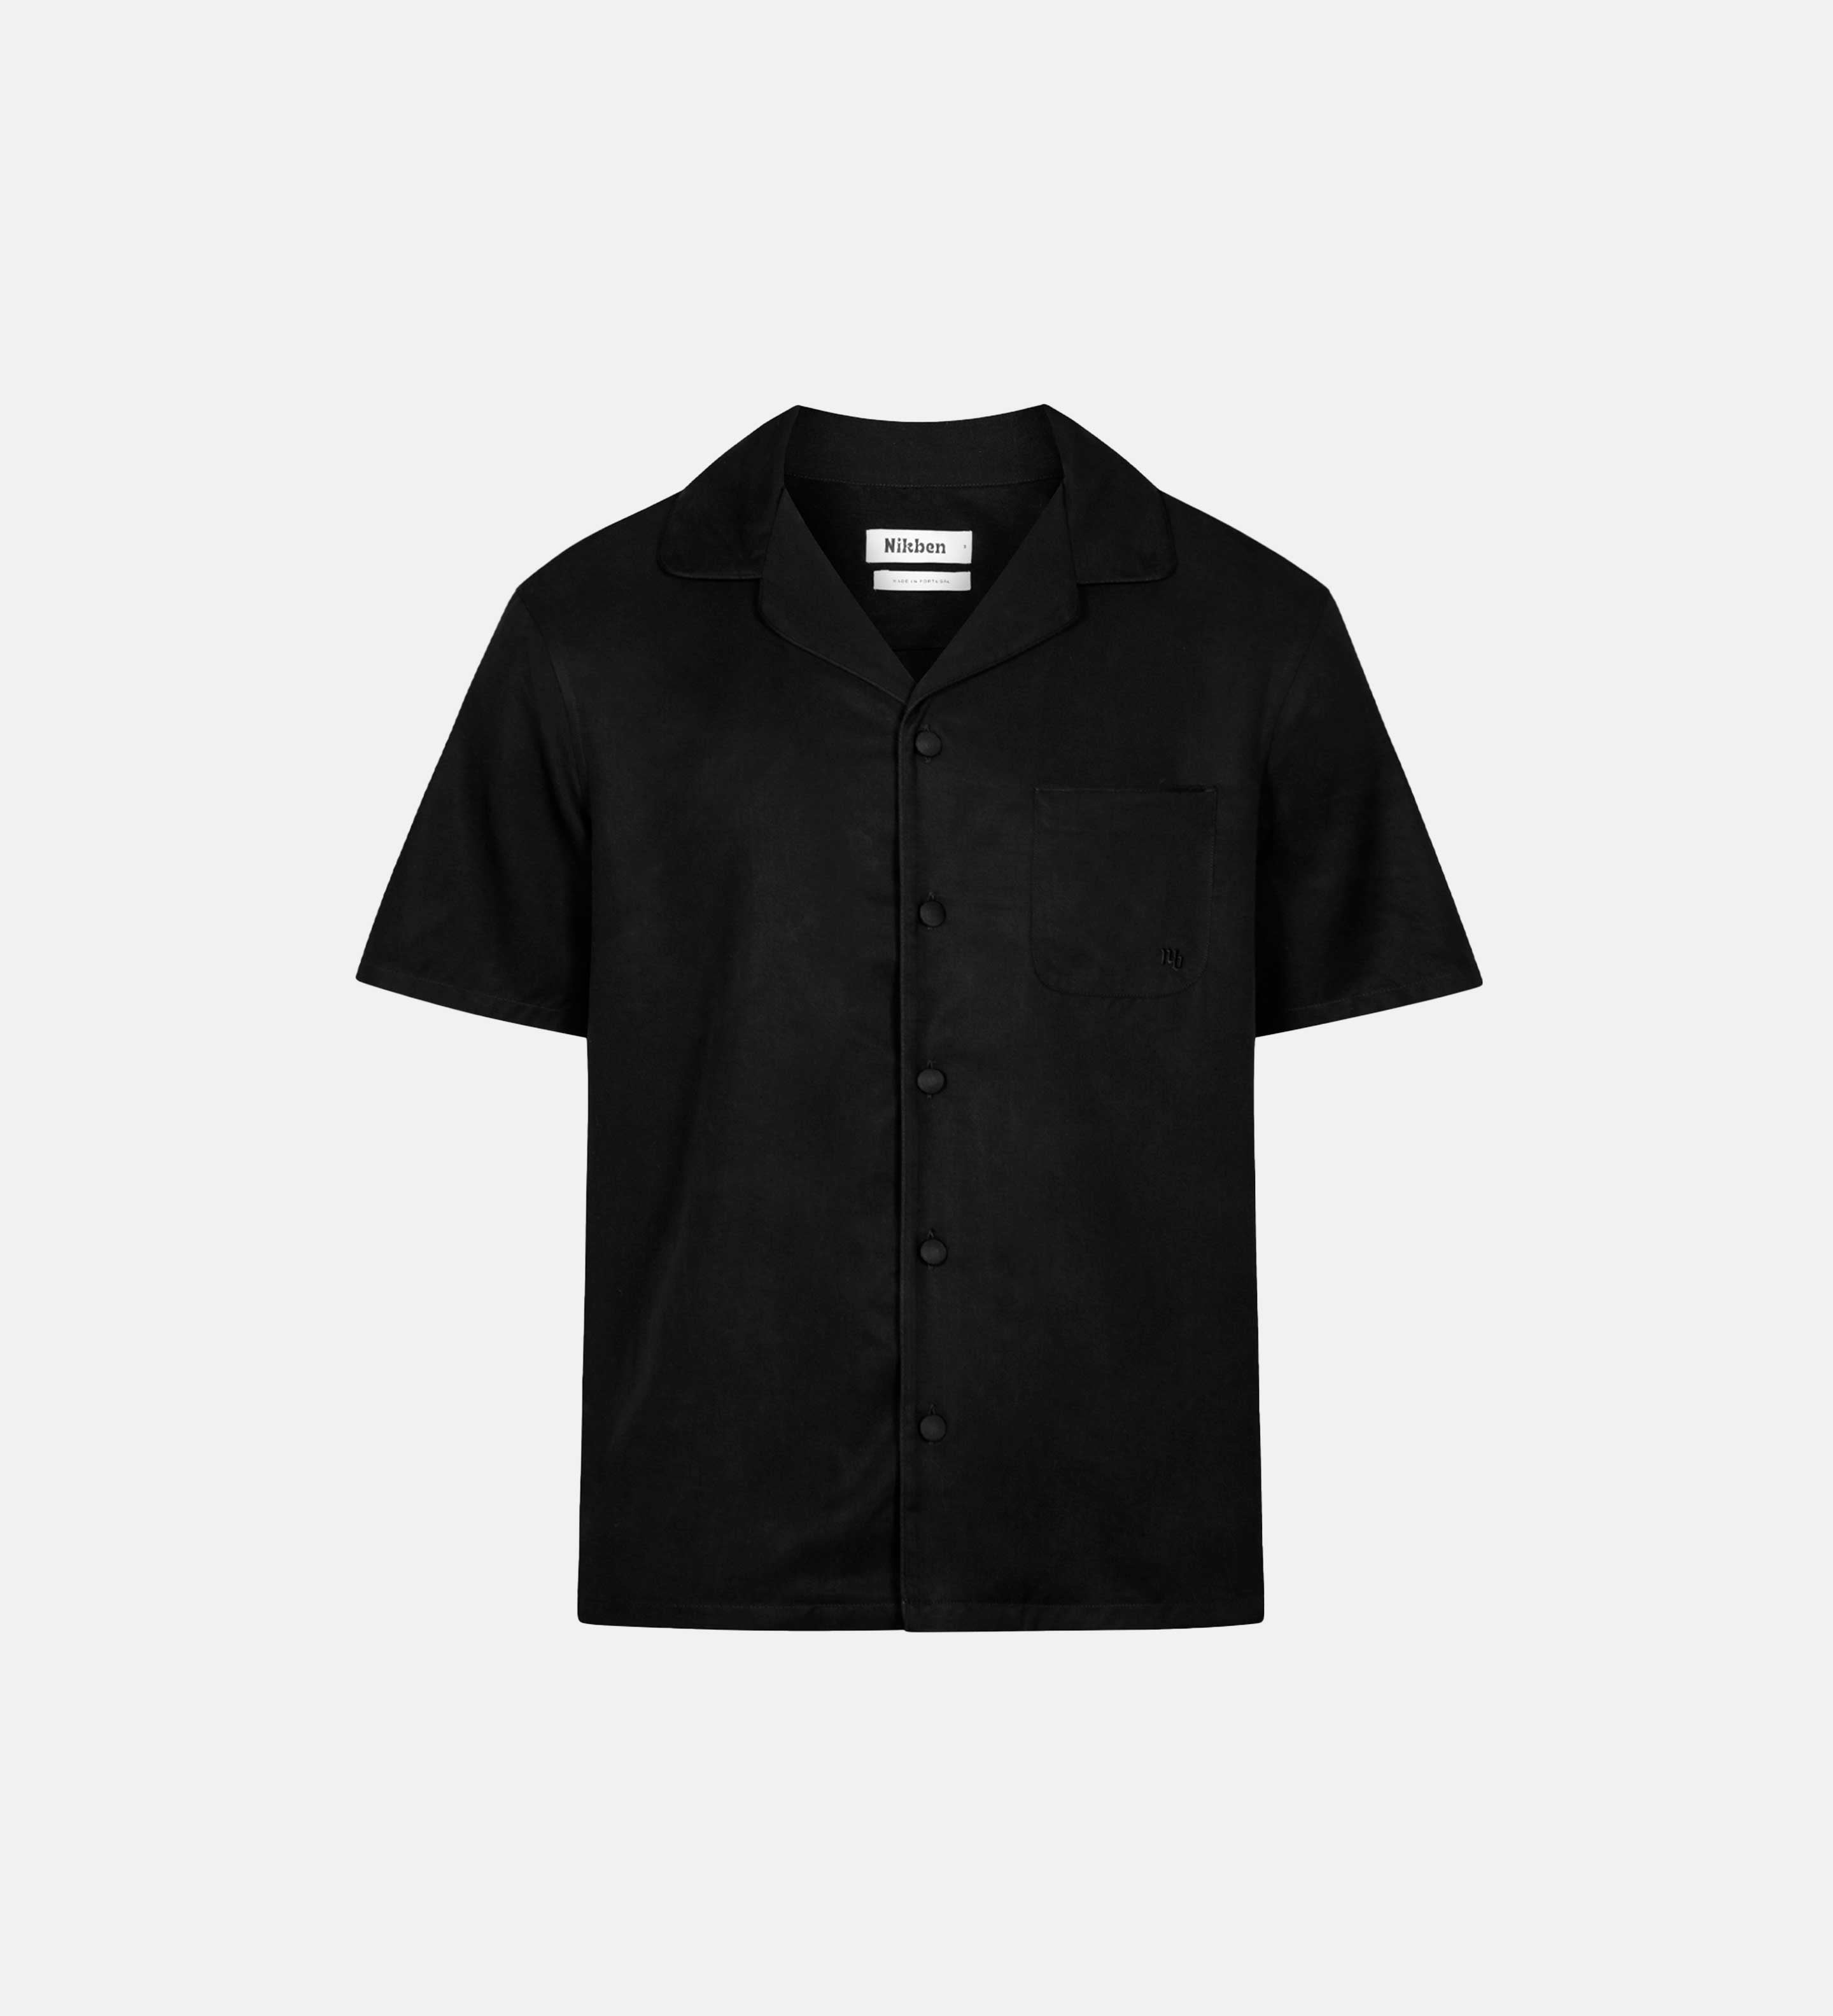 Black short-sleeved vacation shirt with an open collar, one breast pocket, and button closure.